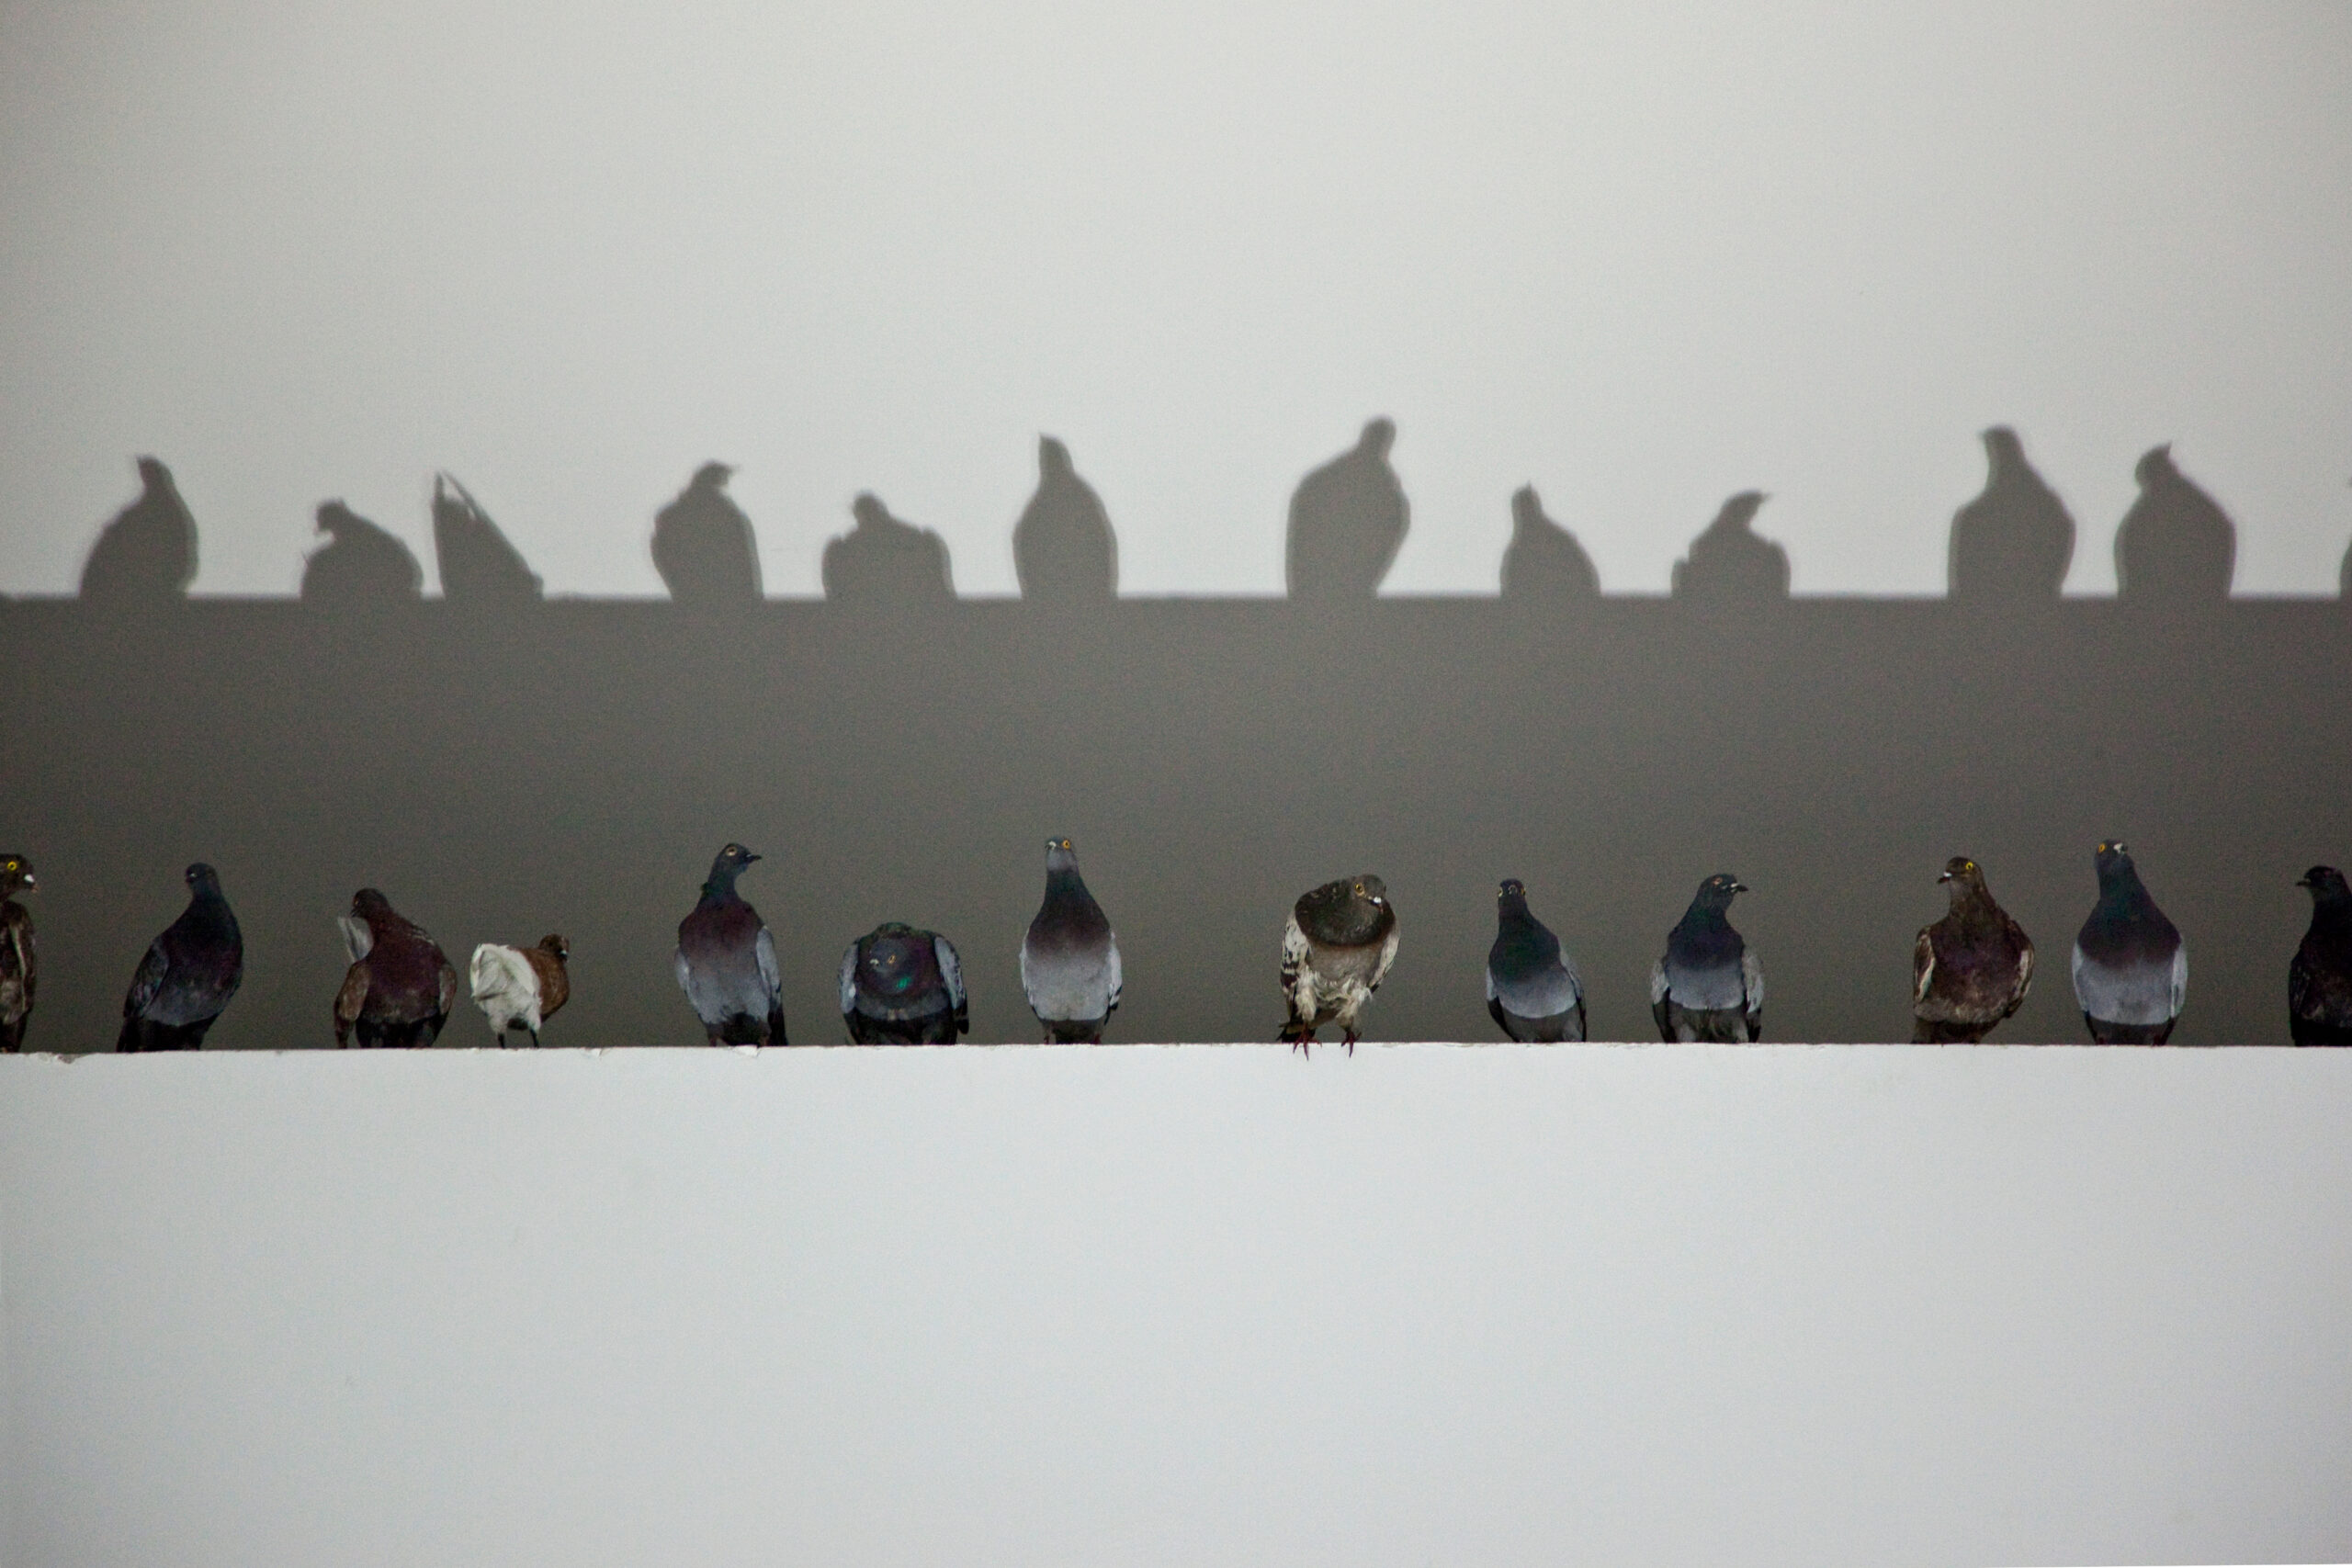 Maurizio Cattelan, Others, 2011, Taxidermied pigeons, Environmental dimensions, Installation view, 54th Venice Biennale, 2011